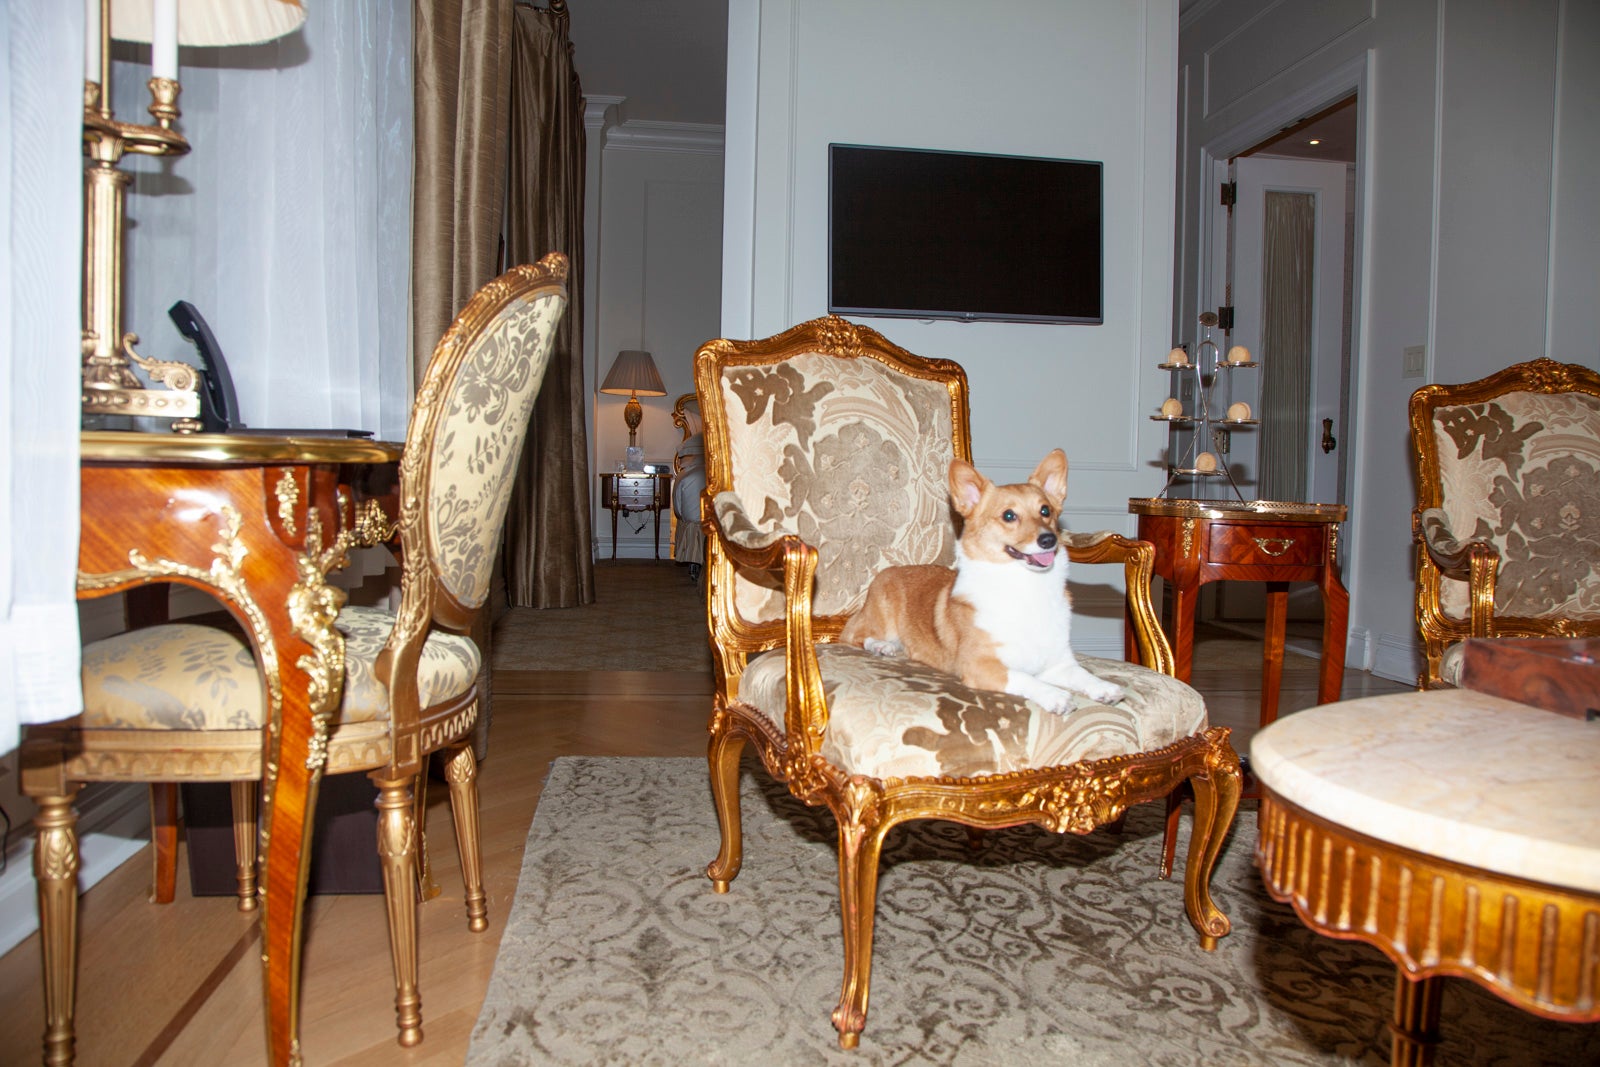 You are currently viewing Uptown corgis: My dog’s pet-friendly stay at The Plaza